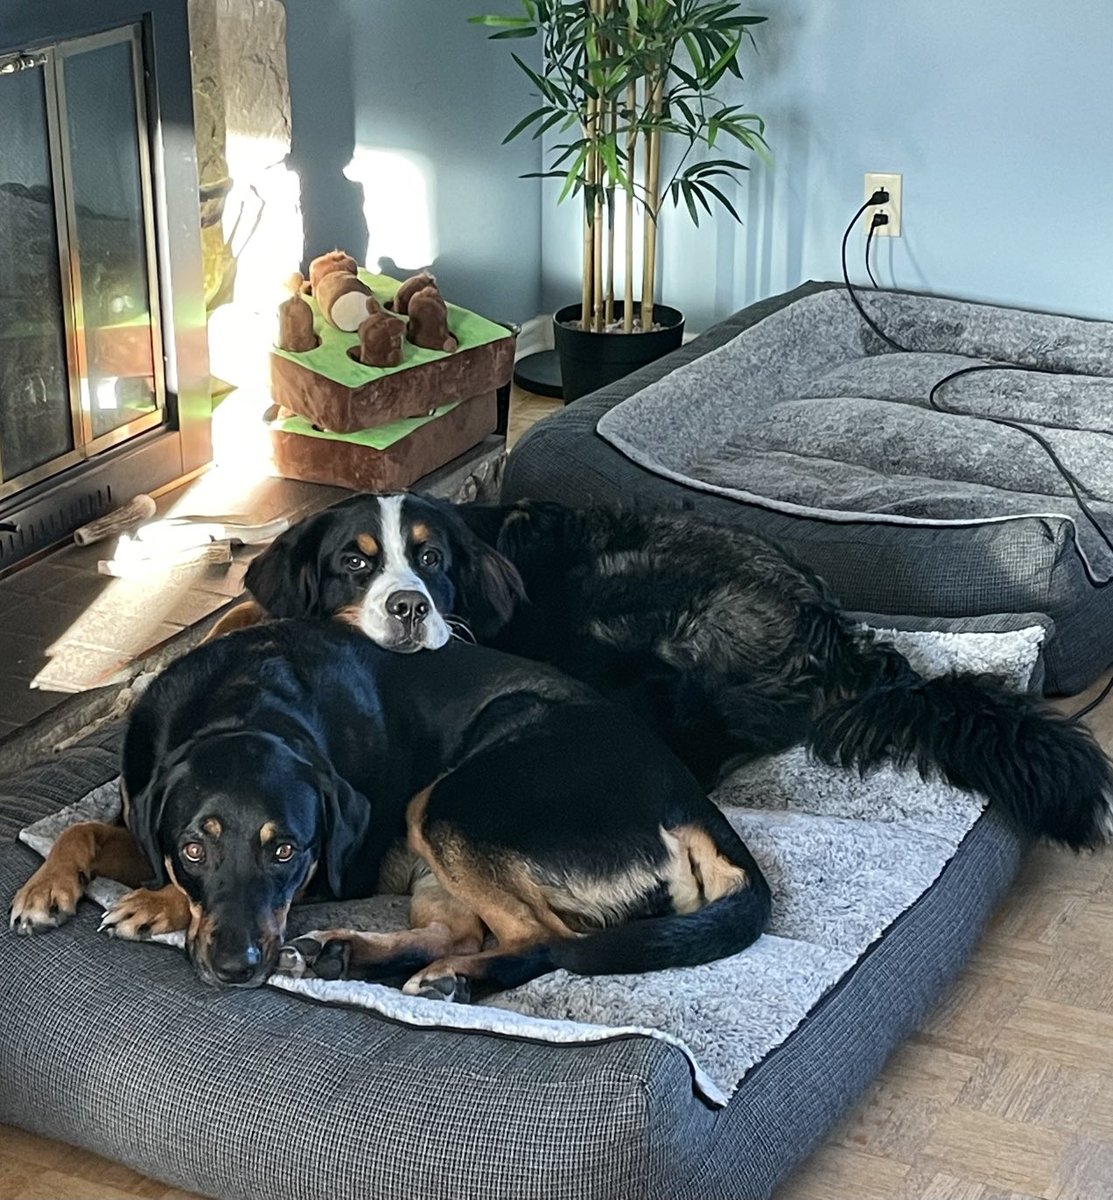 Ruby and Toby 🥰🐾🥰 BFF’s for life. #BerneseMountainDog #BernWeiler #AfternoonVibes